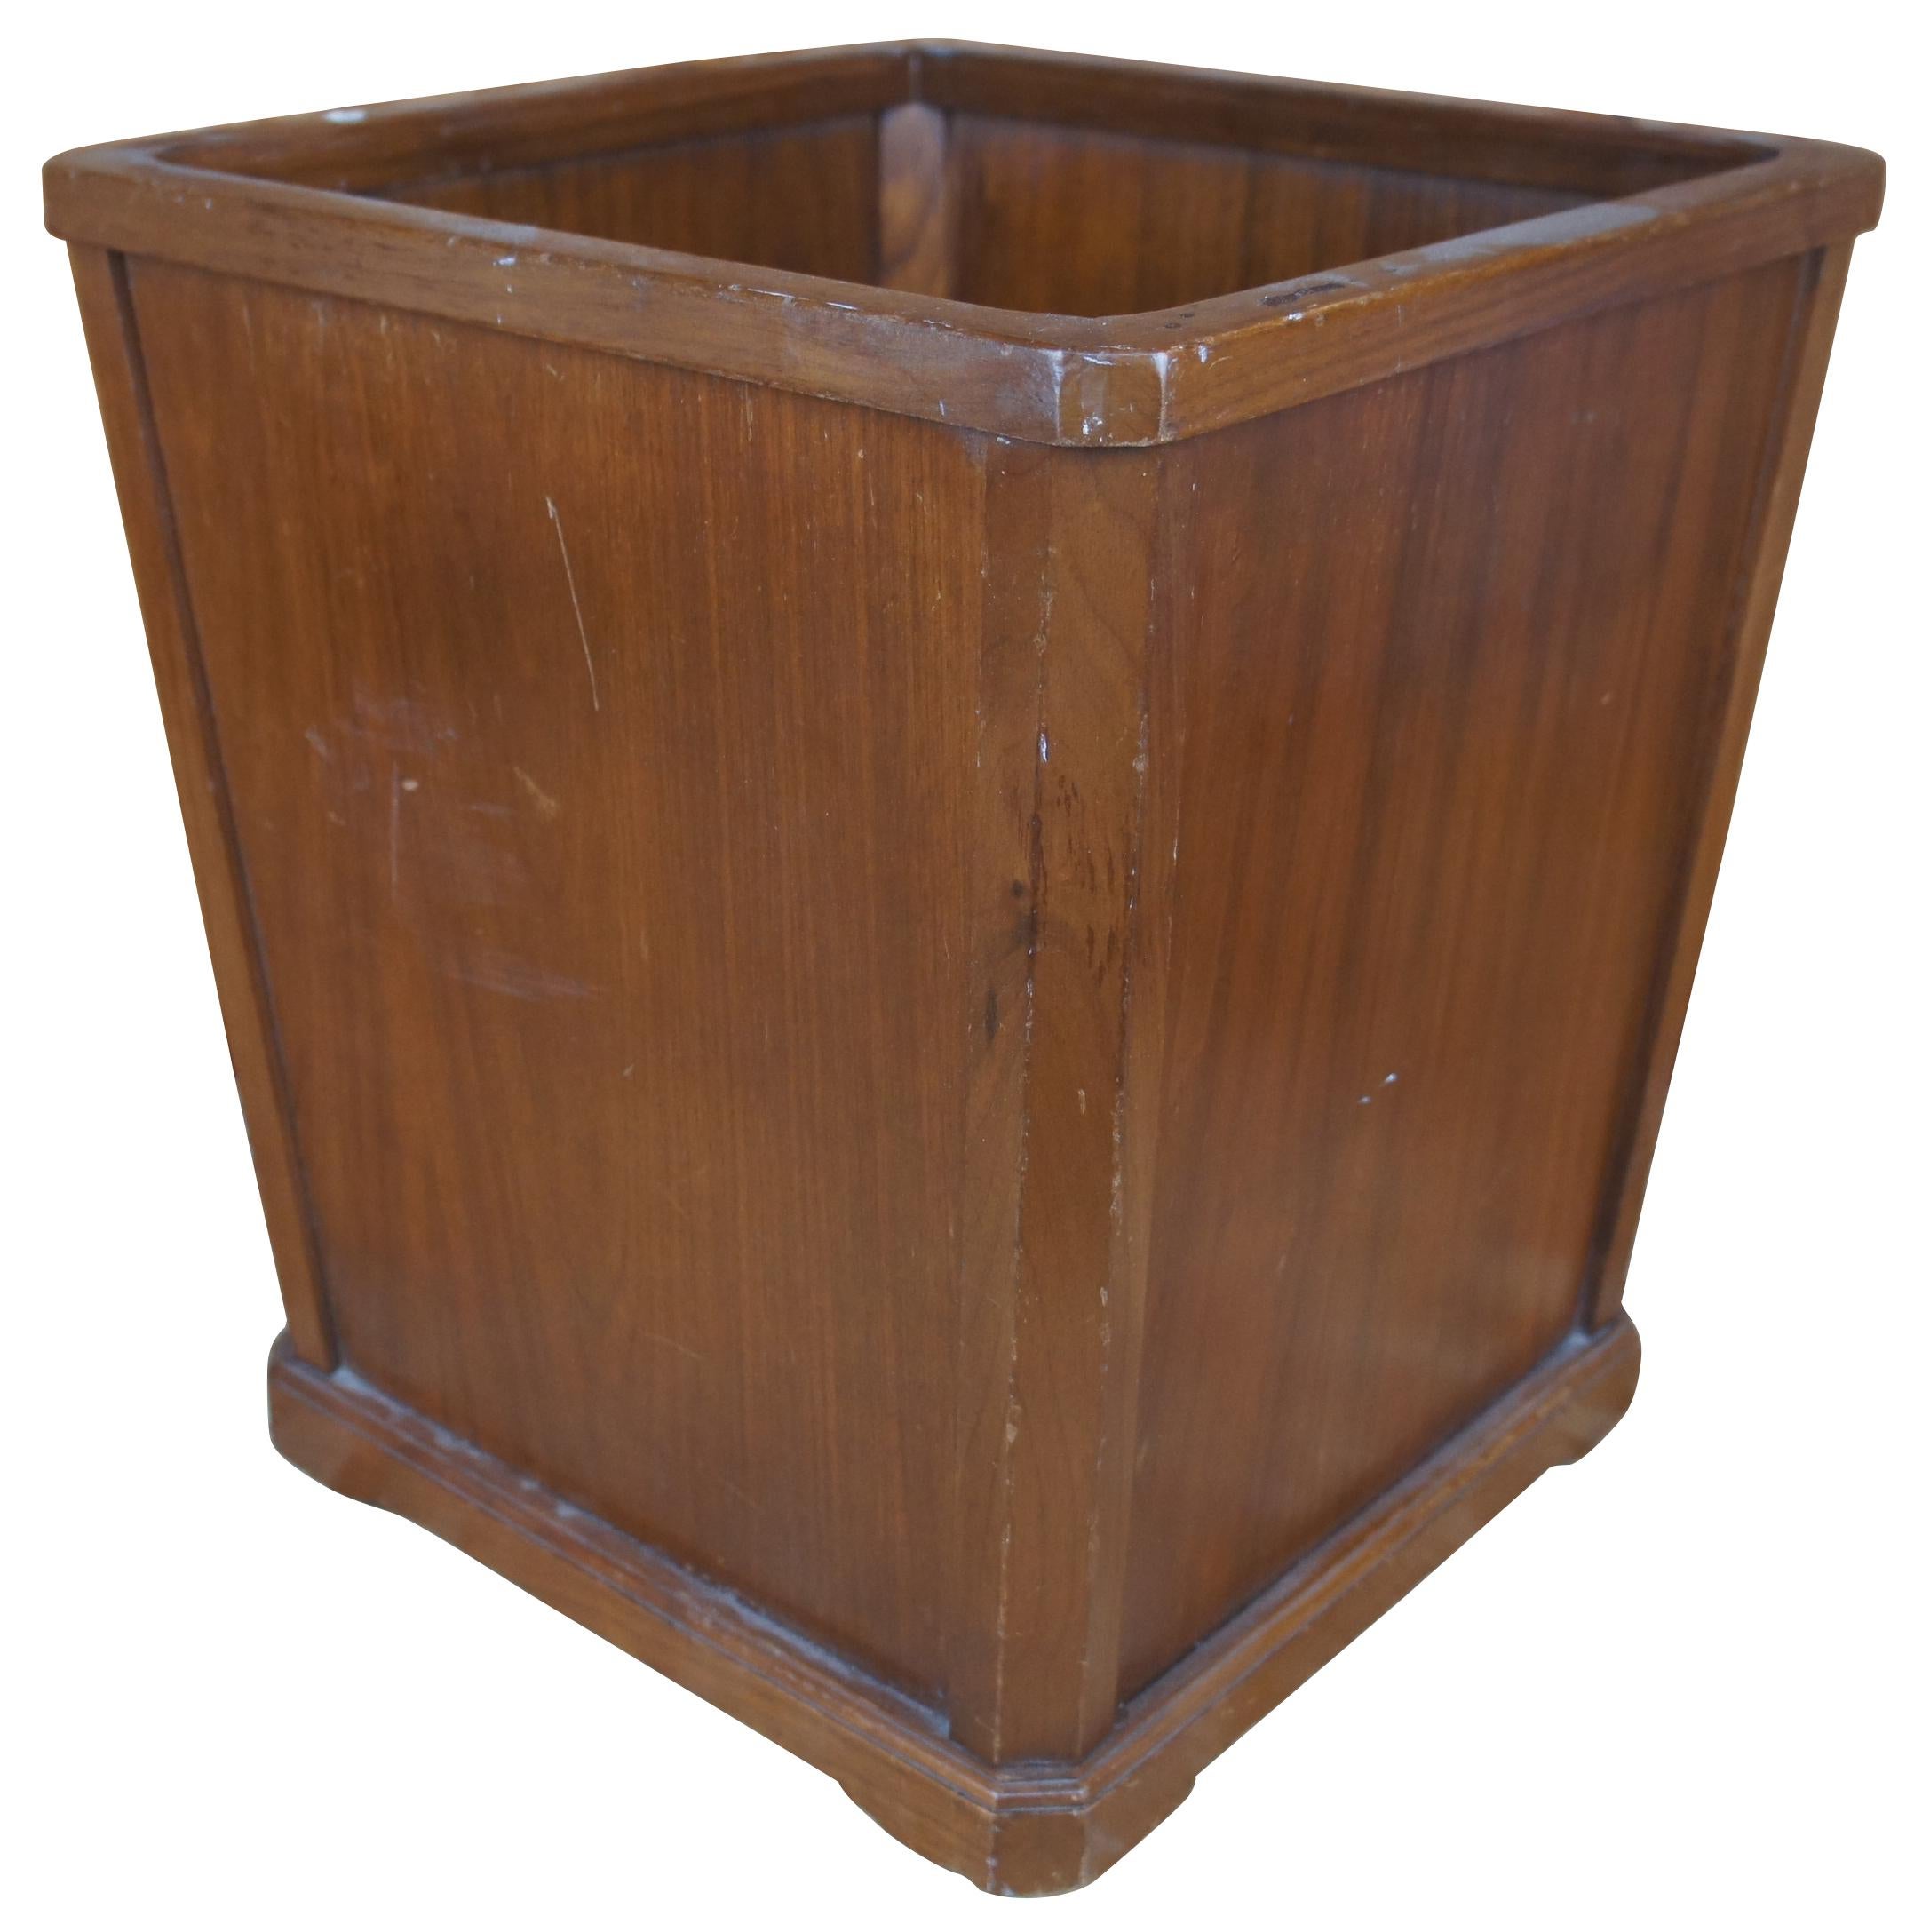 Large Mid-Century Modern executive desk walnut waste basket or wood trash can with square tapered form, attributed to Nucraft. Founded in Grand Rapids, Michigan, in 1945 by George W. Schad, Nucraft’s early days were built upon an idea to craft solid